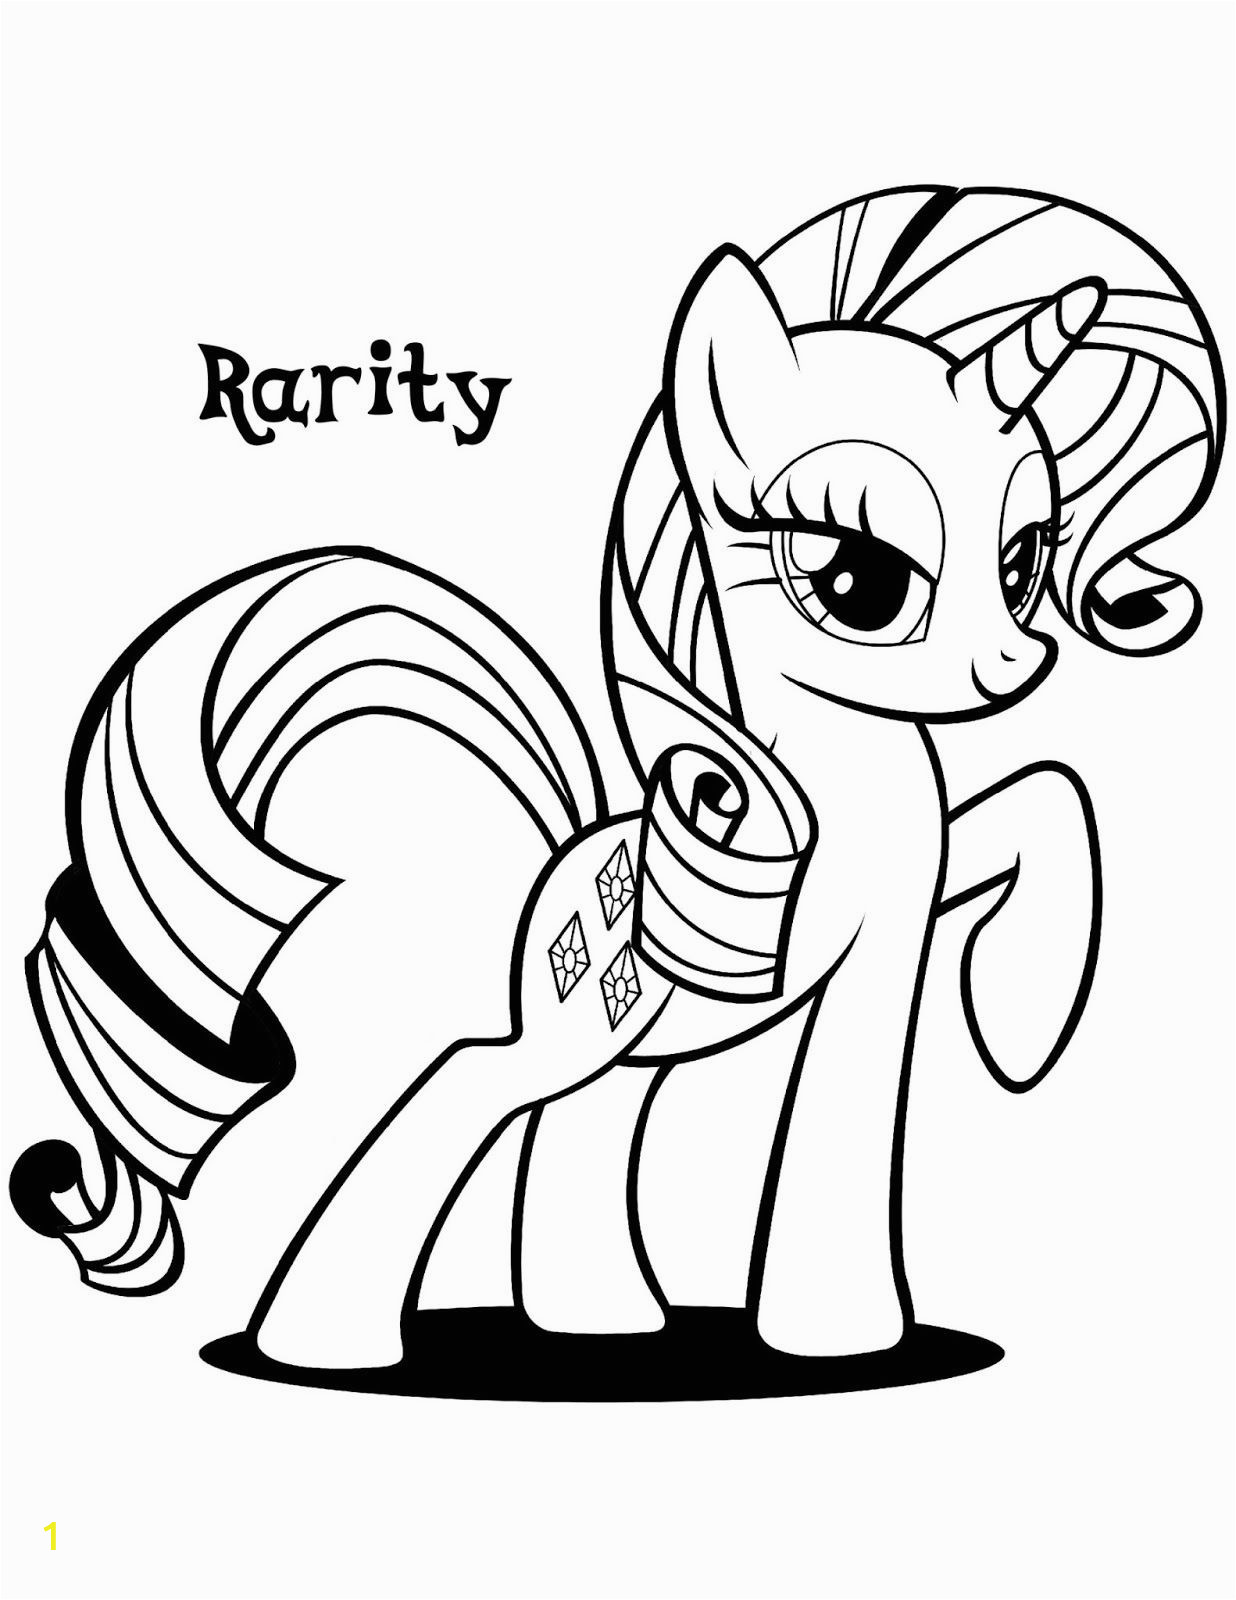 Coloring Pages My Little Pony Mlp Printable Coloring Pages